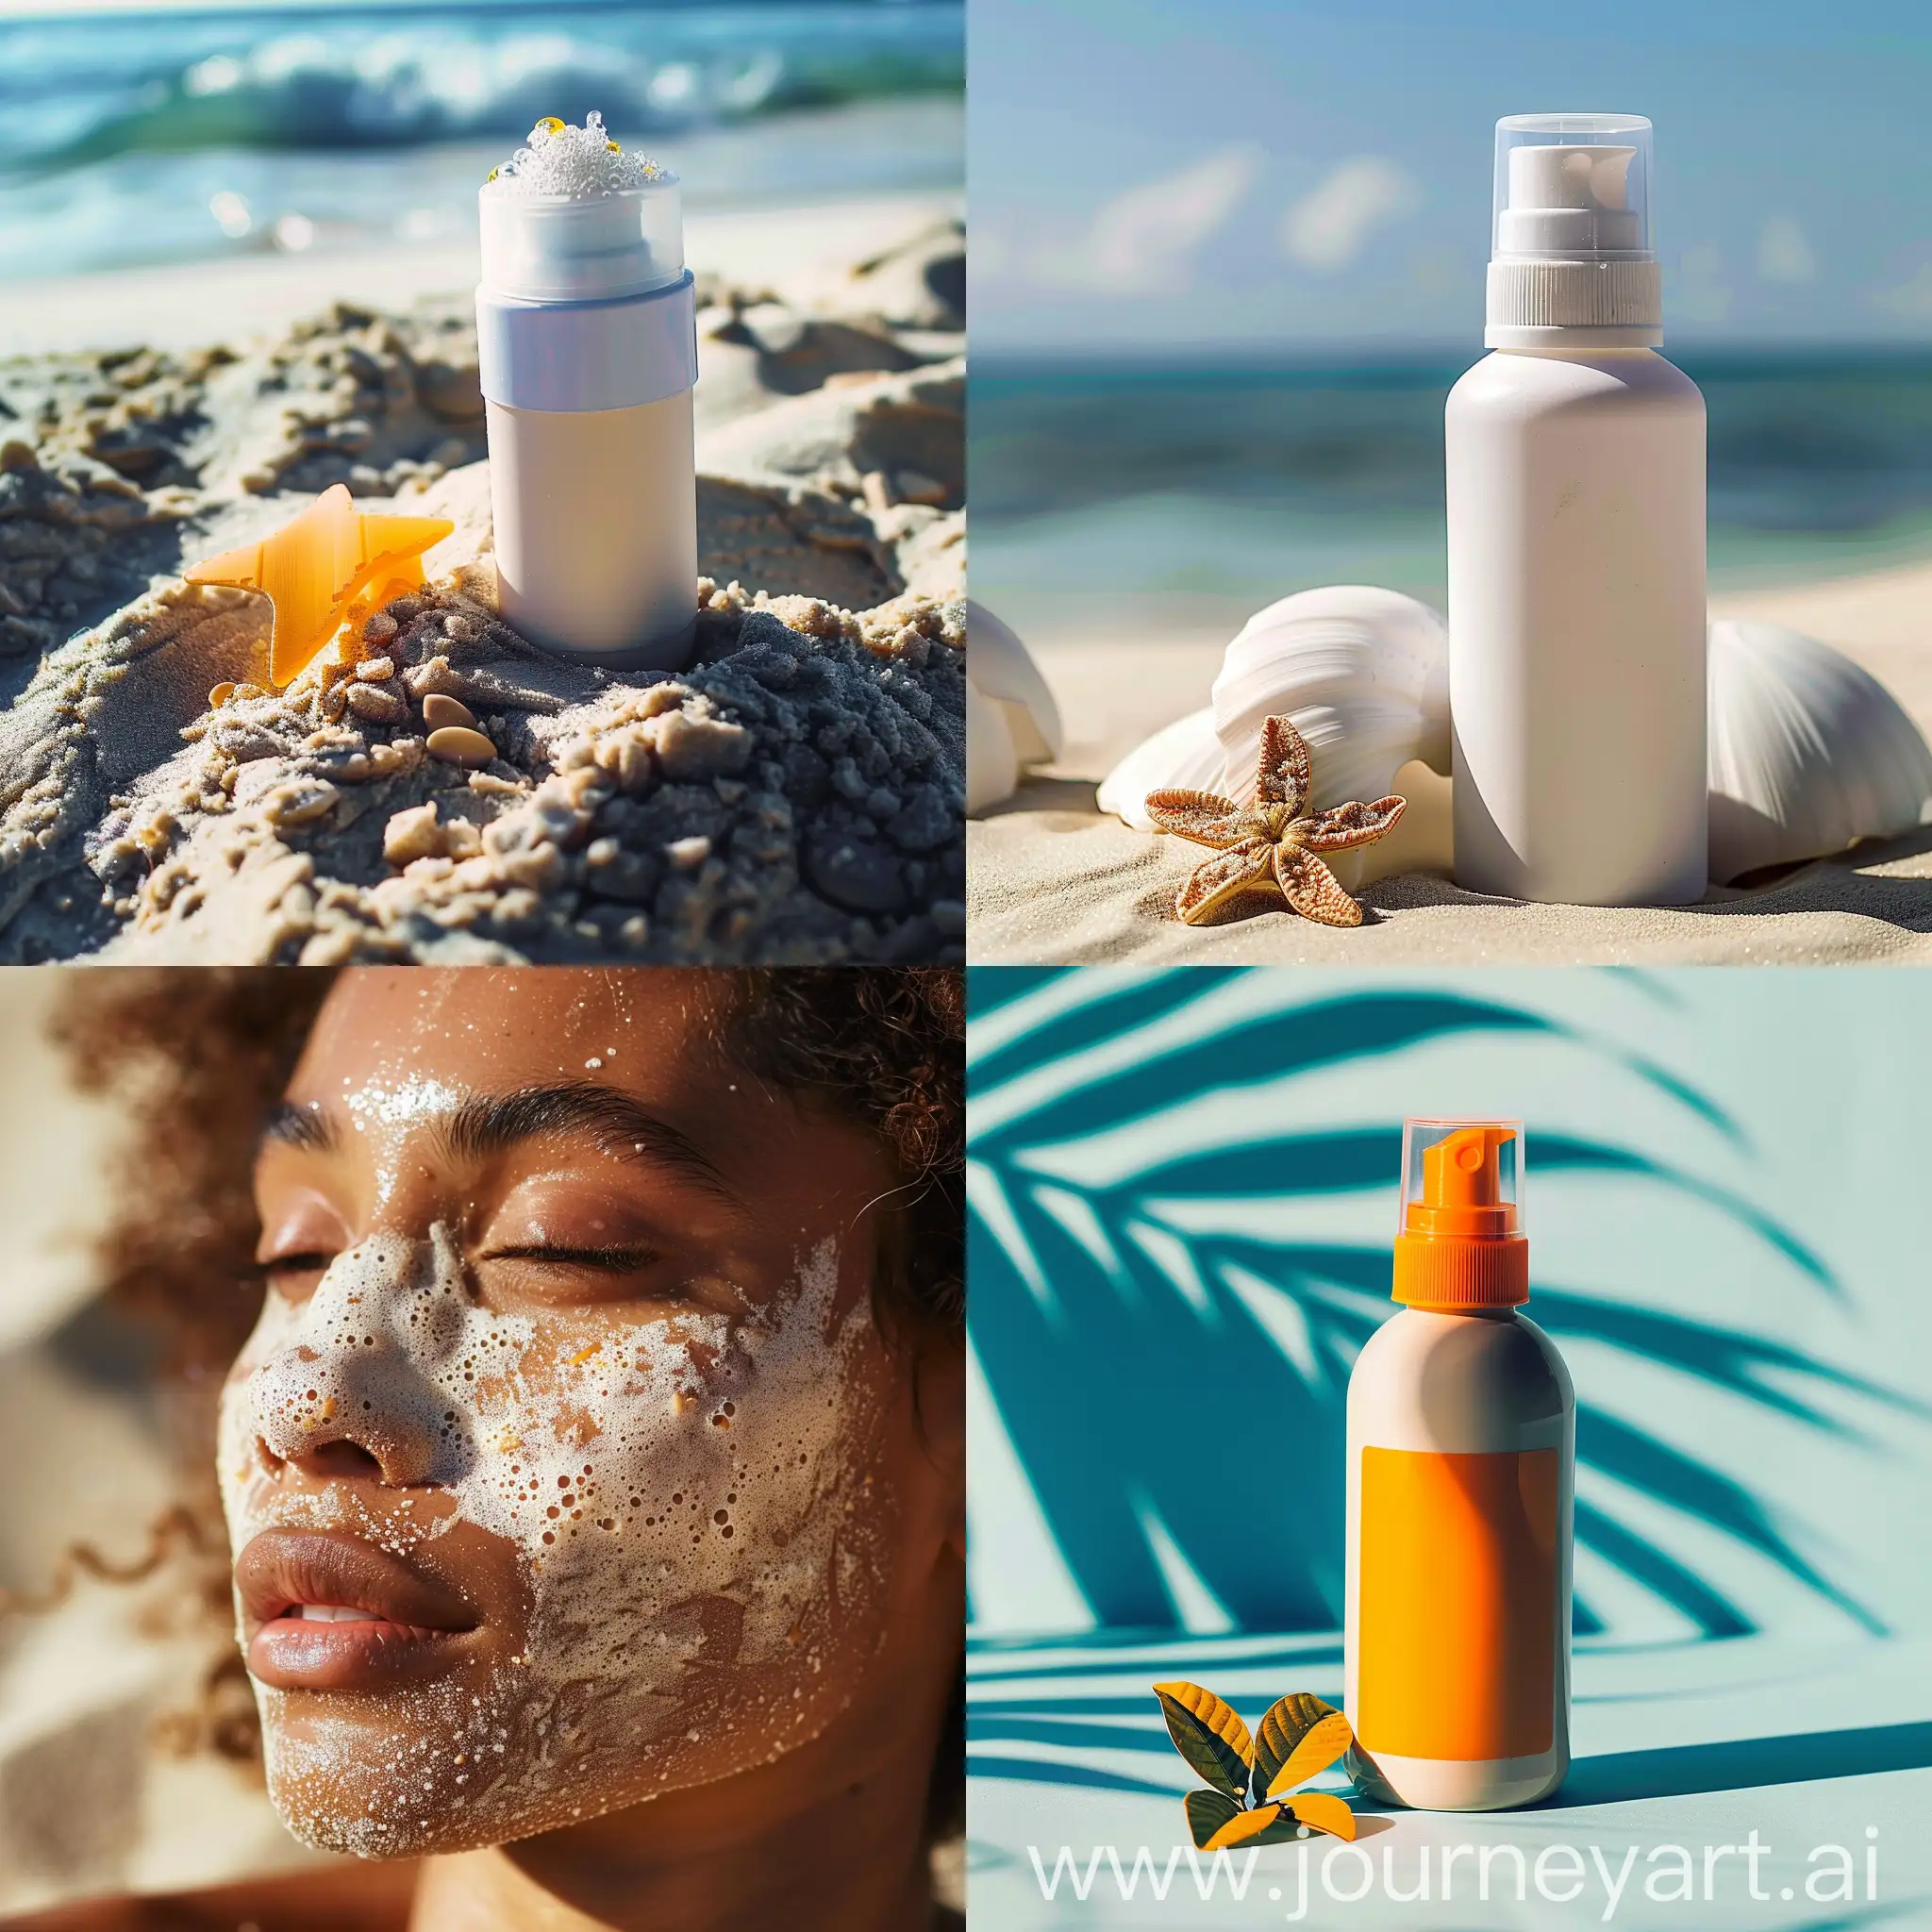 Customers often have expressed dissatisfaction with traditional sunscreen products, citing their heavy, greasy texture as a significant deterrent to regular use.